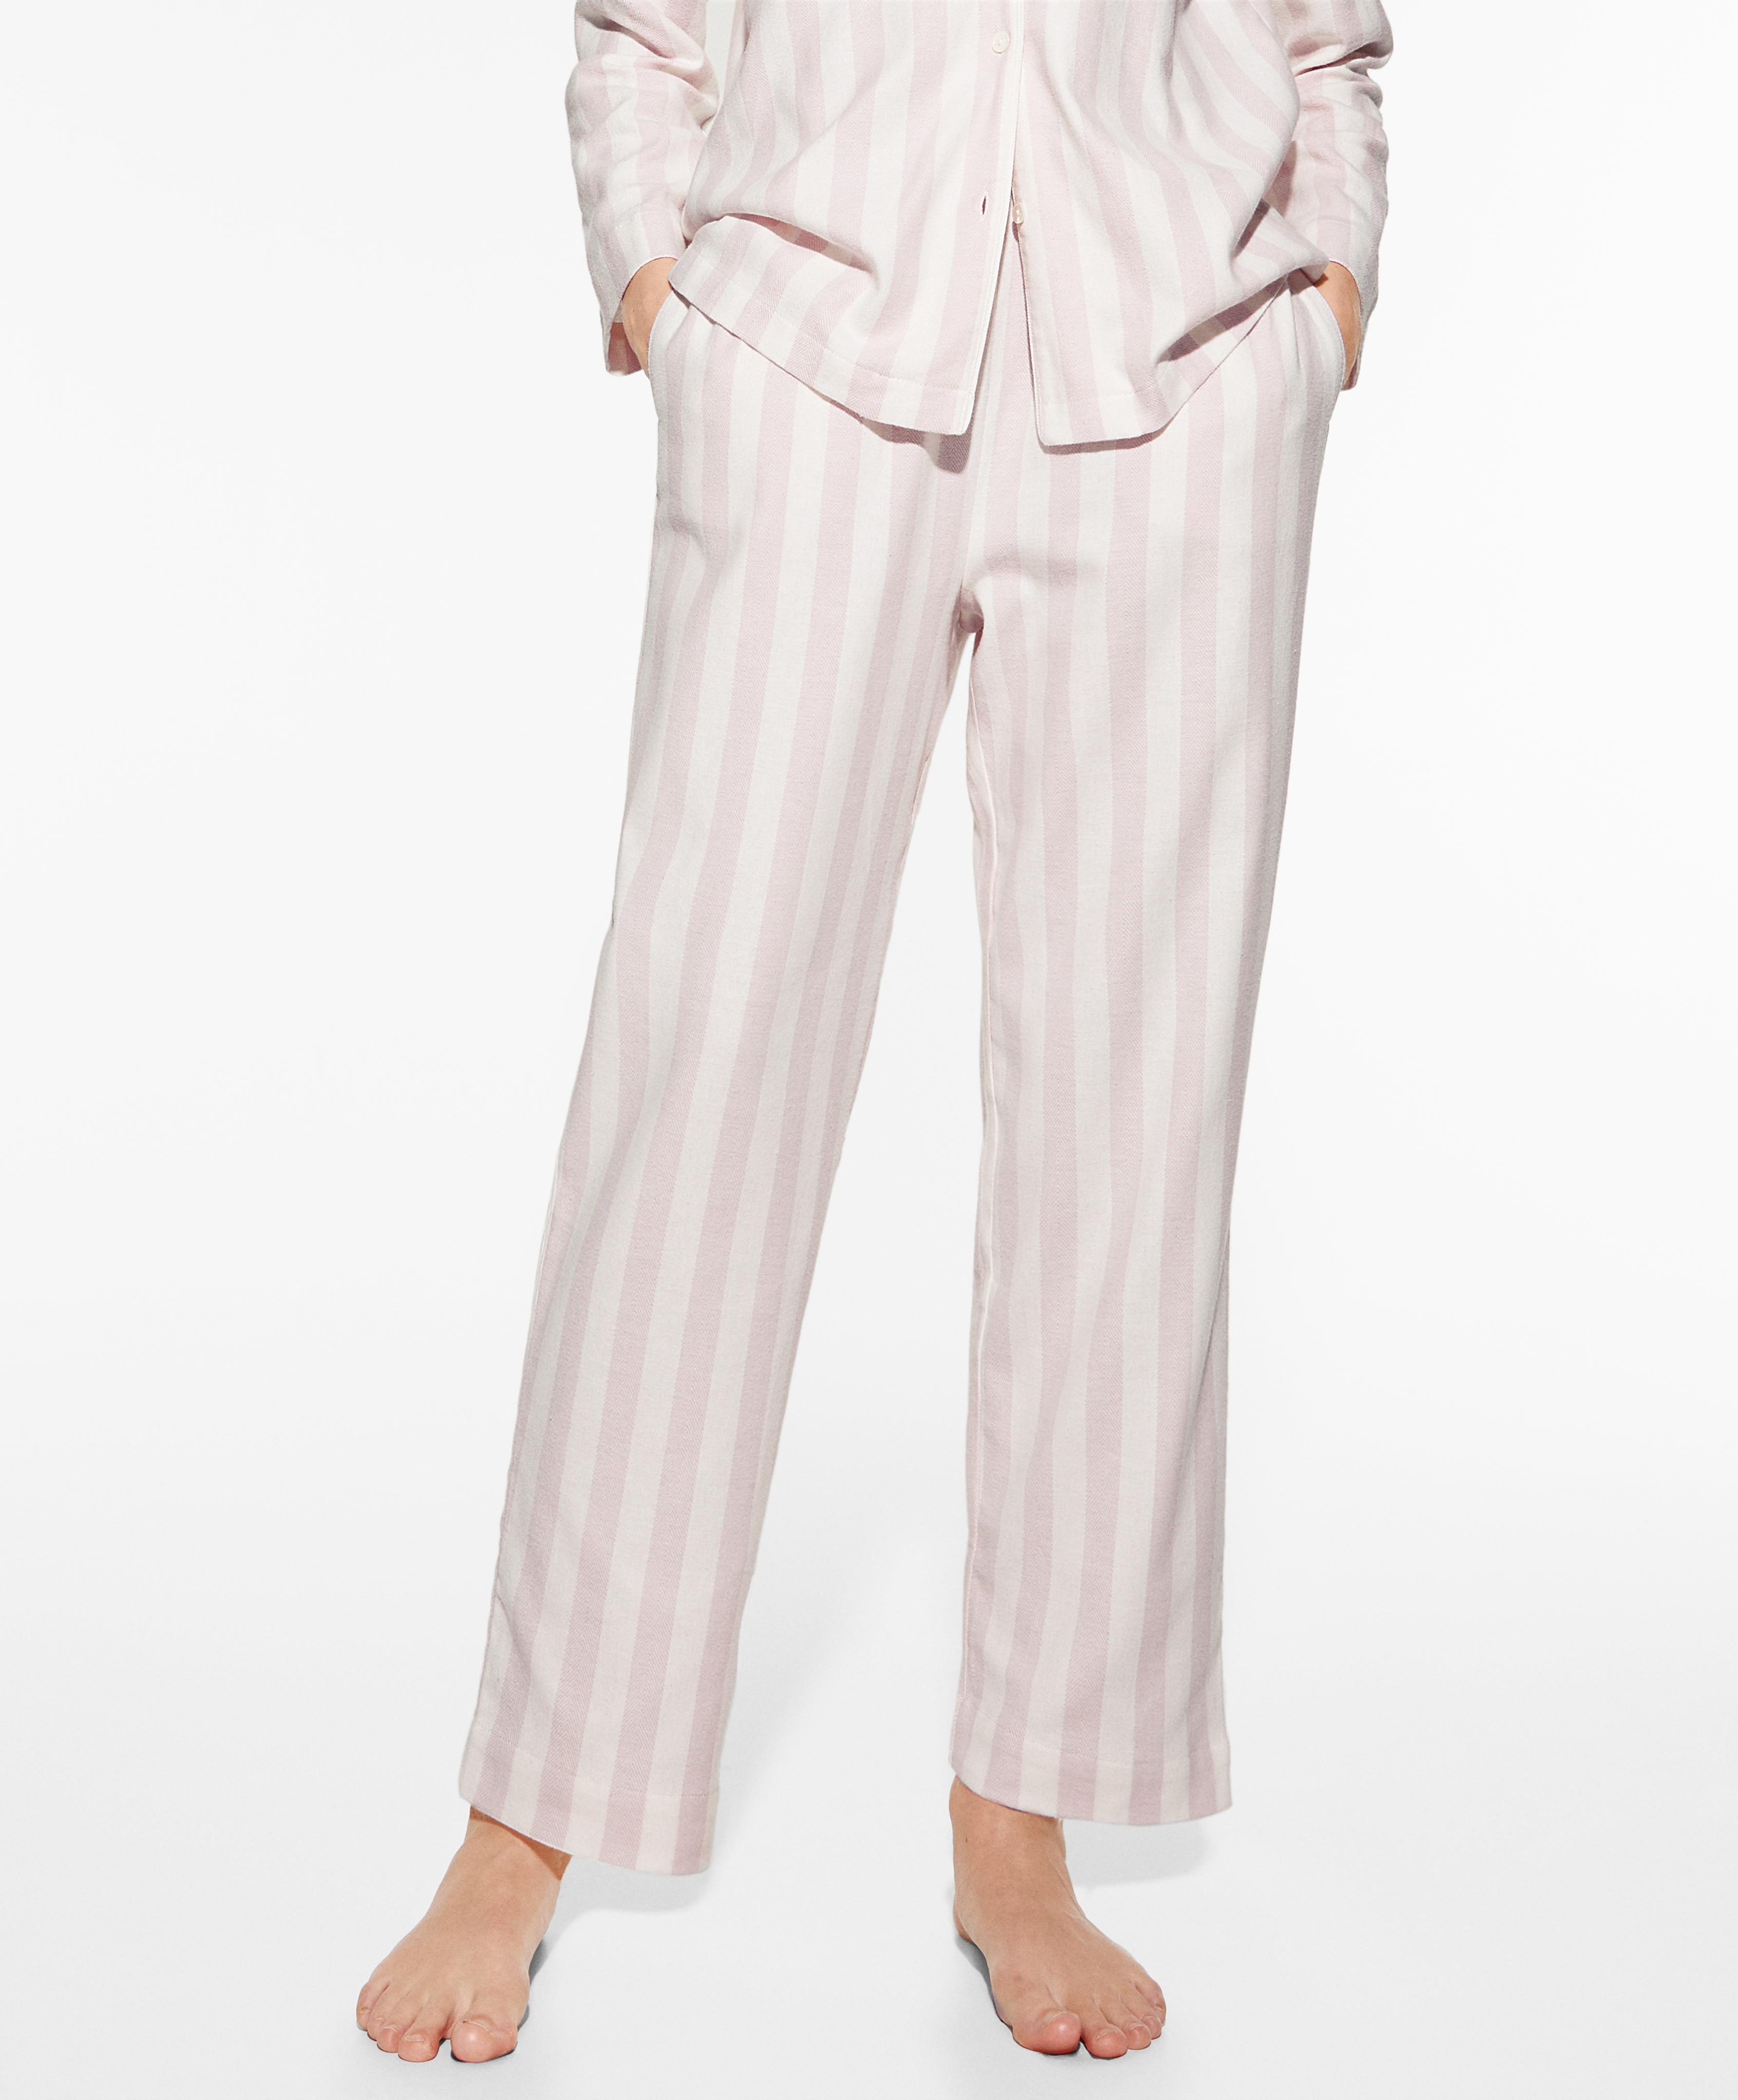 Extrawarm striped trousers